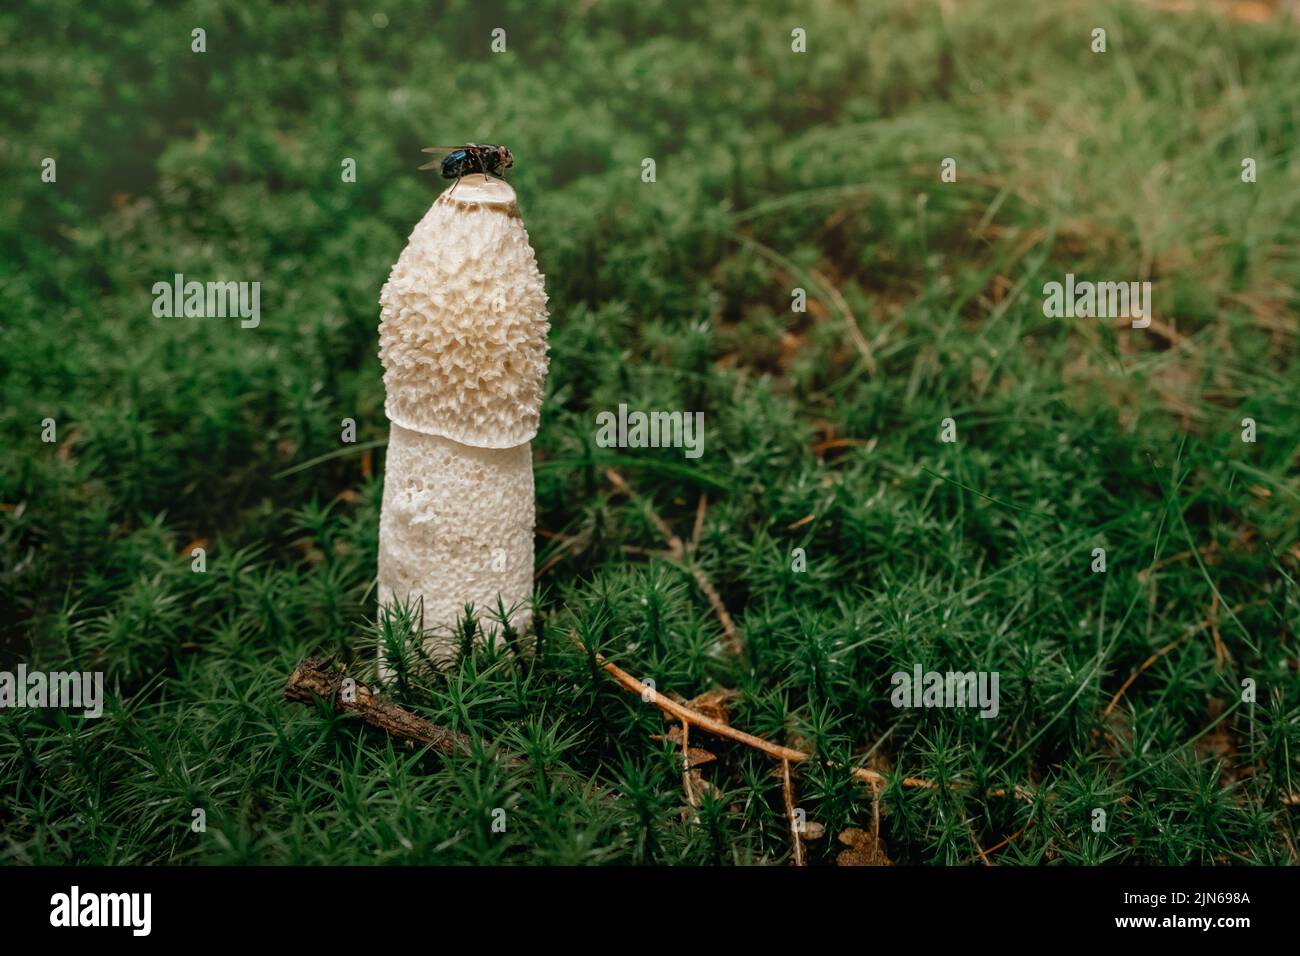 Close-up of a common stinkhorn mushroom, phallus impudicus, growing in green moss Stock Photo